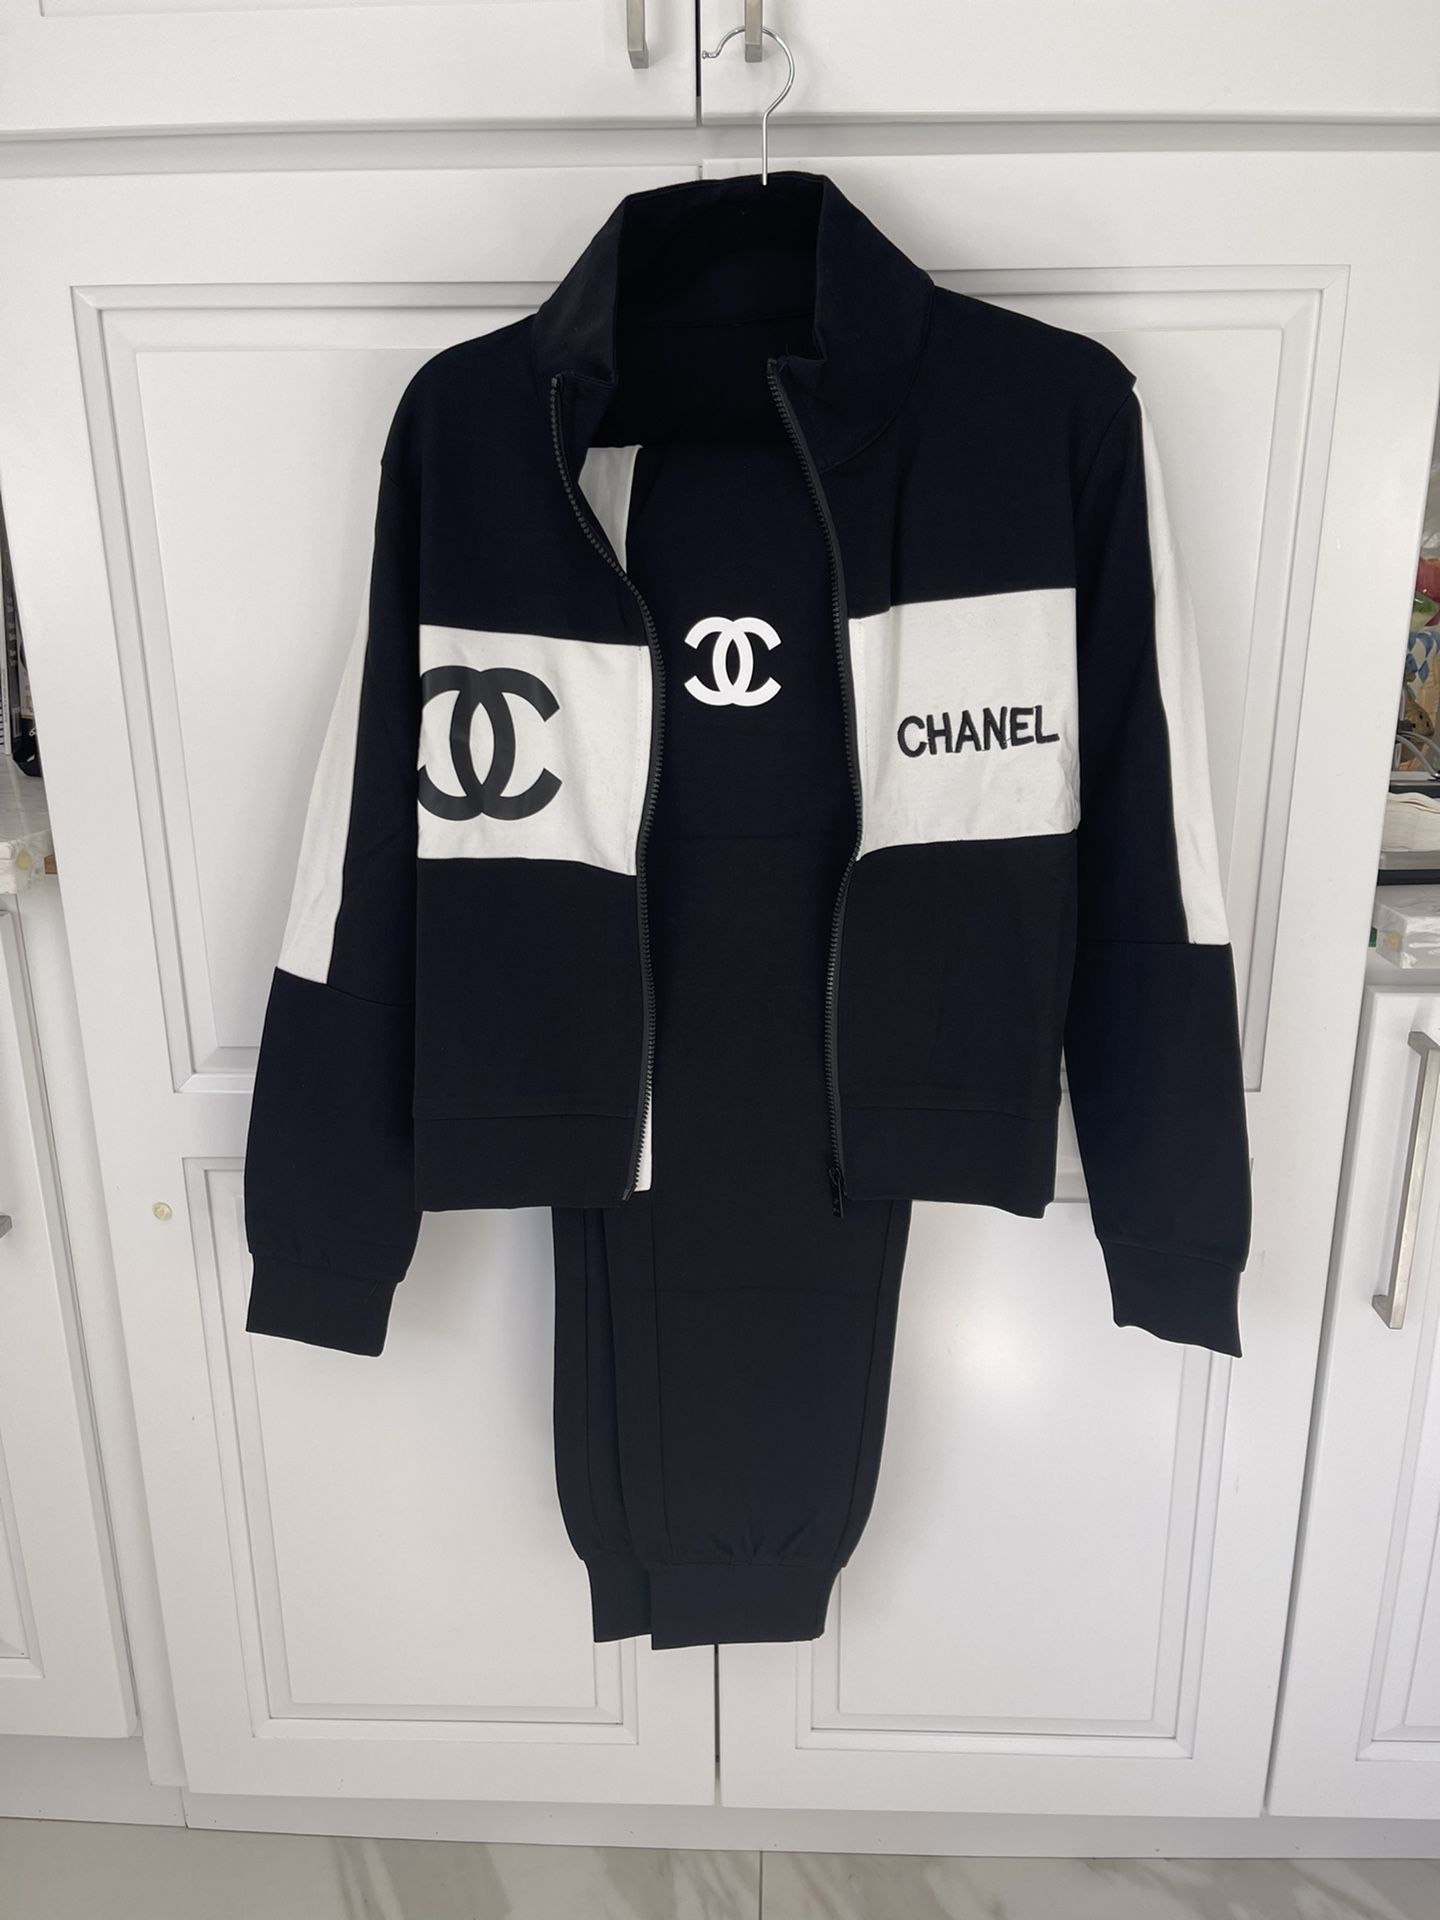 Chanel Tracksuit for Sale in Los Angeles, CA - OfferUp